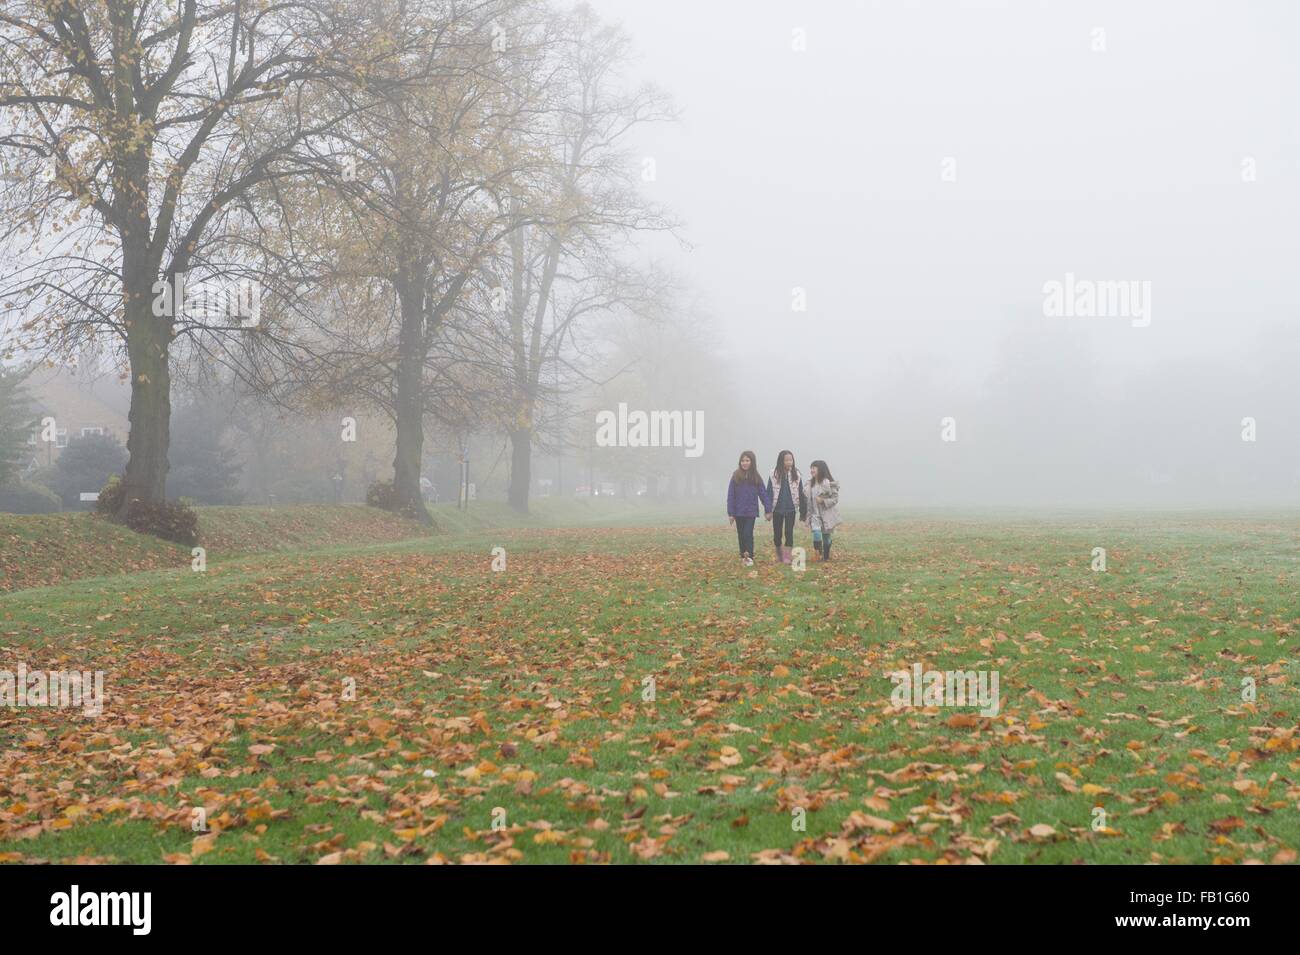 Three young girls walking through field in autumn Stock Photo